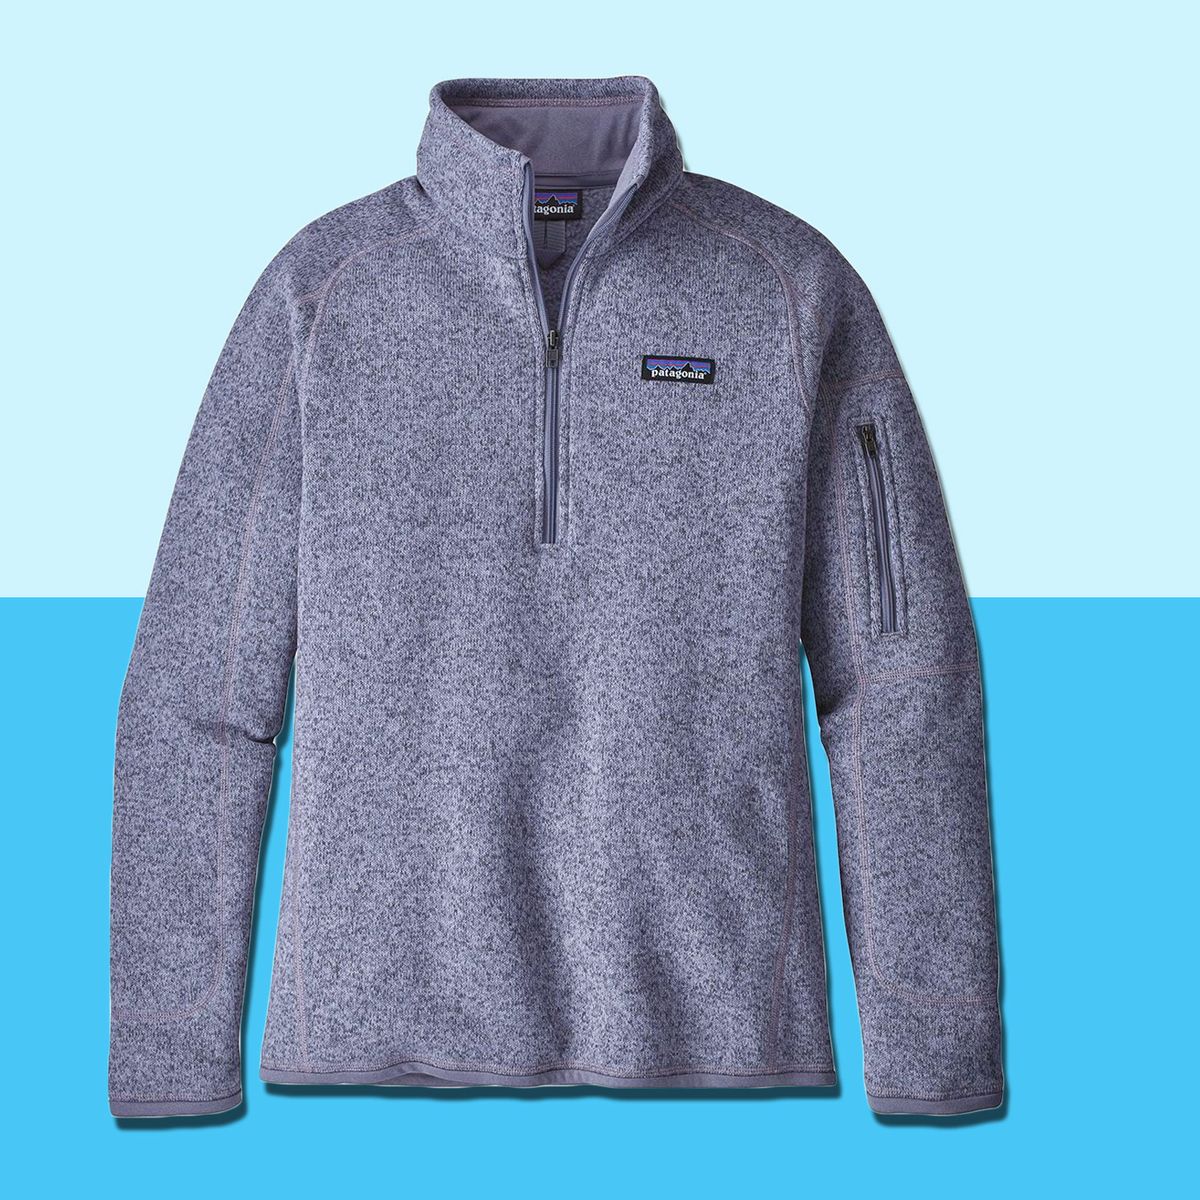 Patagonia Better Sweater on Sale at Backcountry 2019 | The Strategist